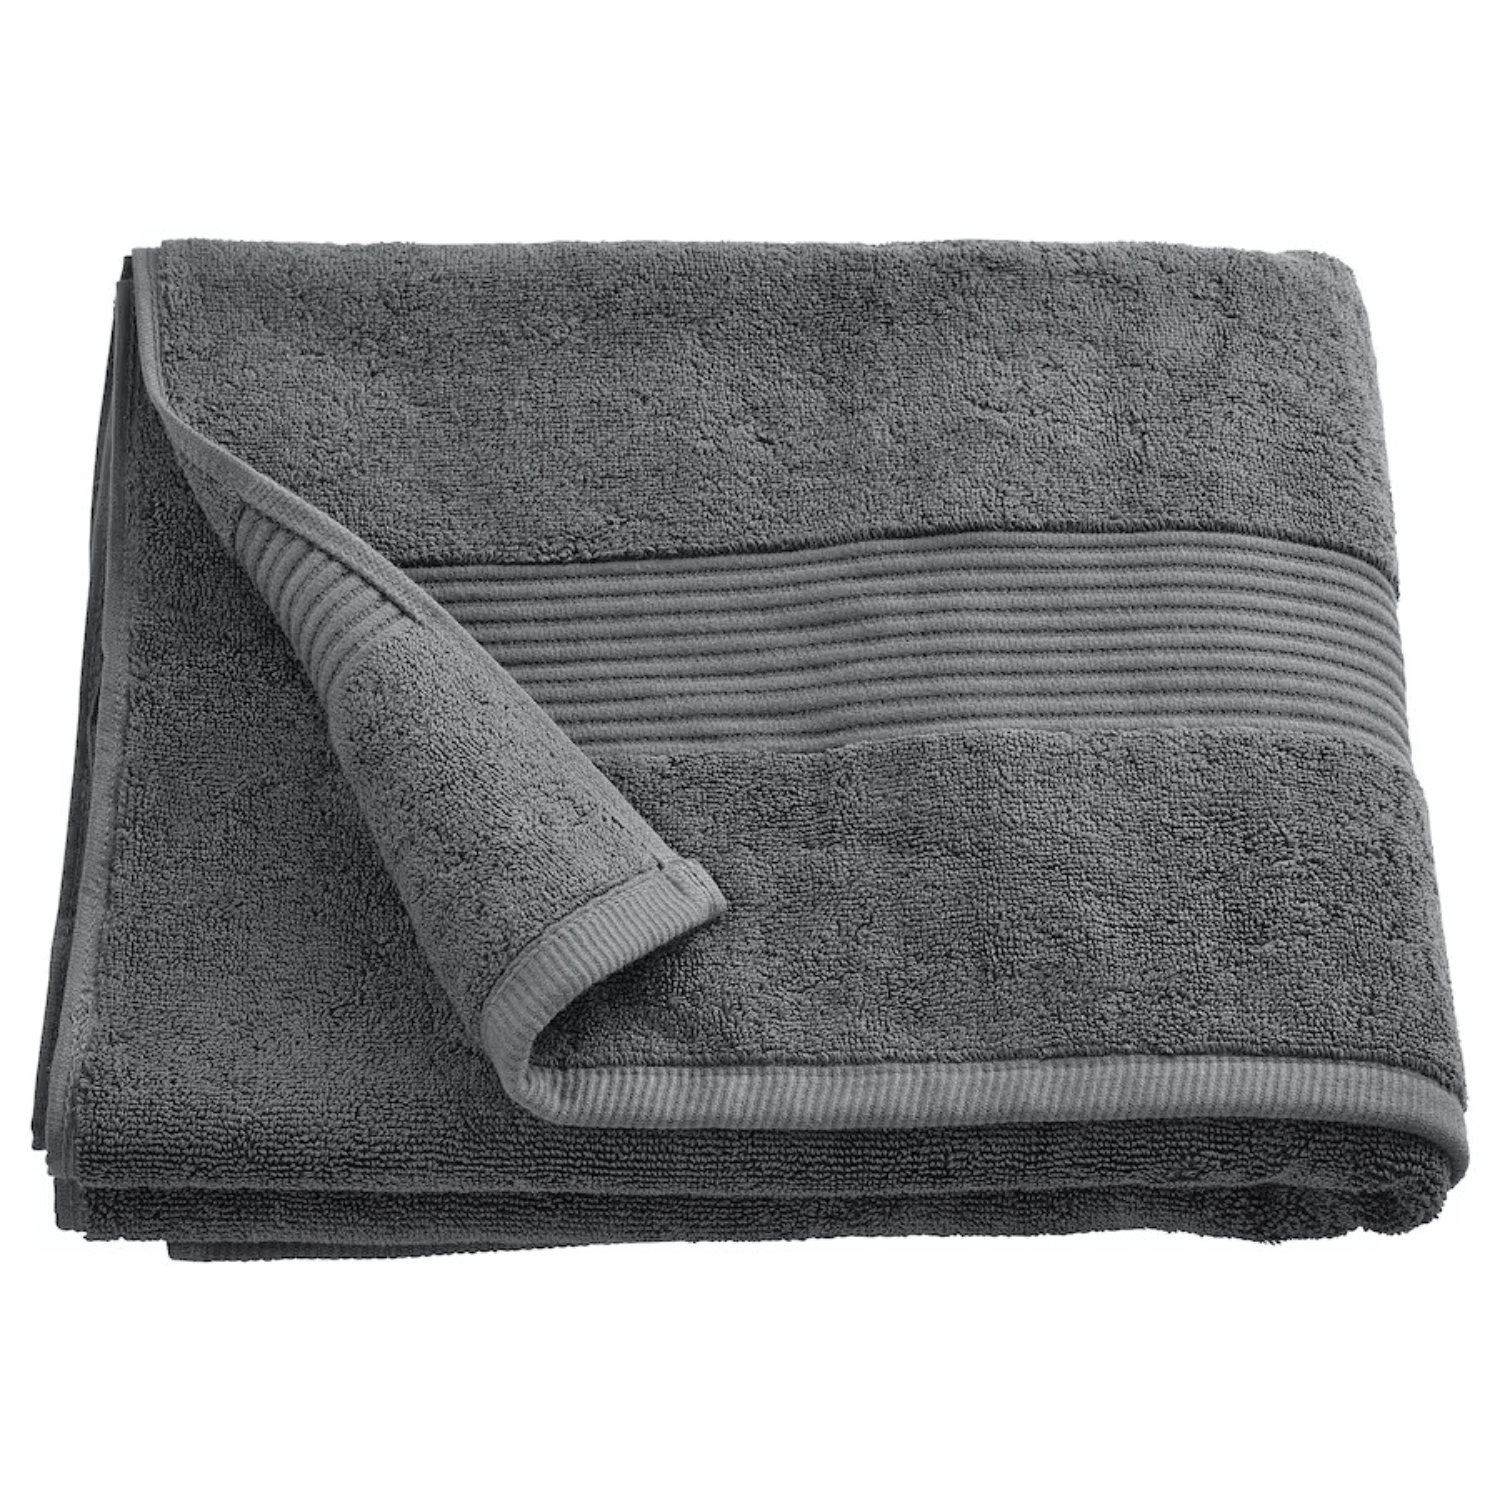 Soft terry towel online with monogram by Bedlam